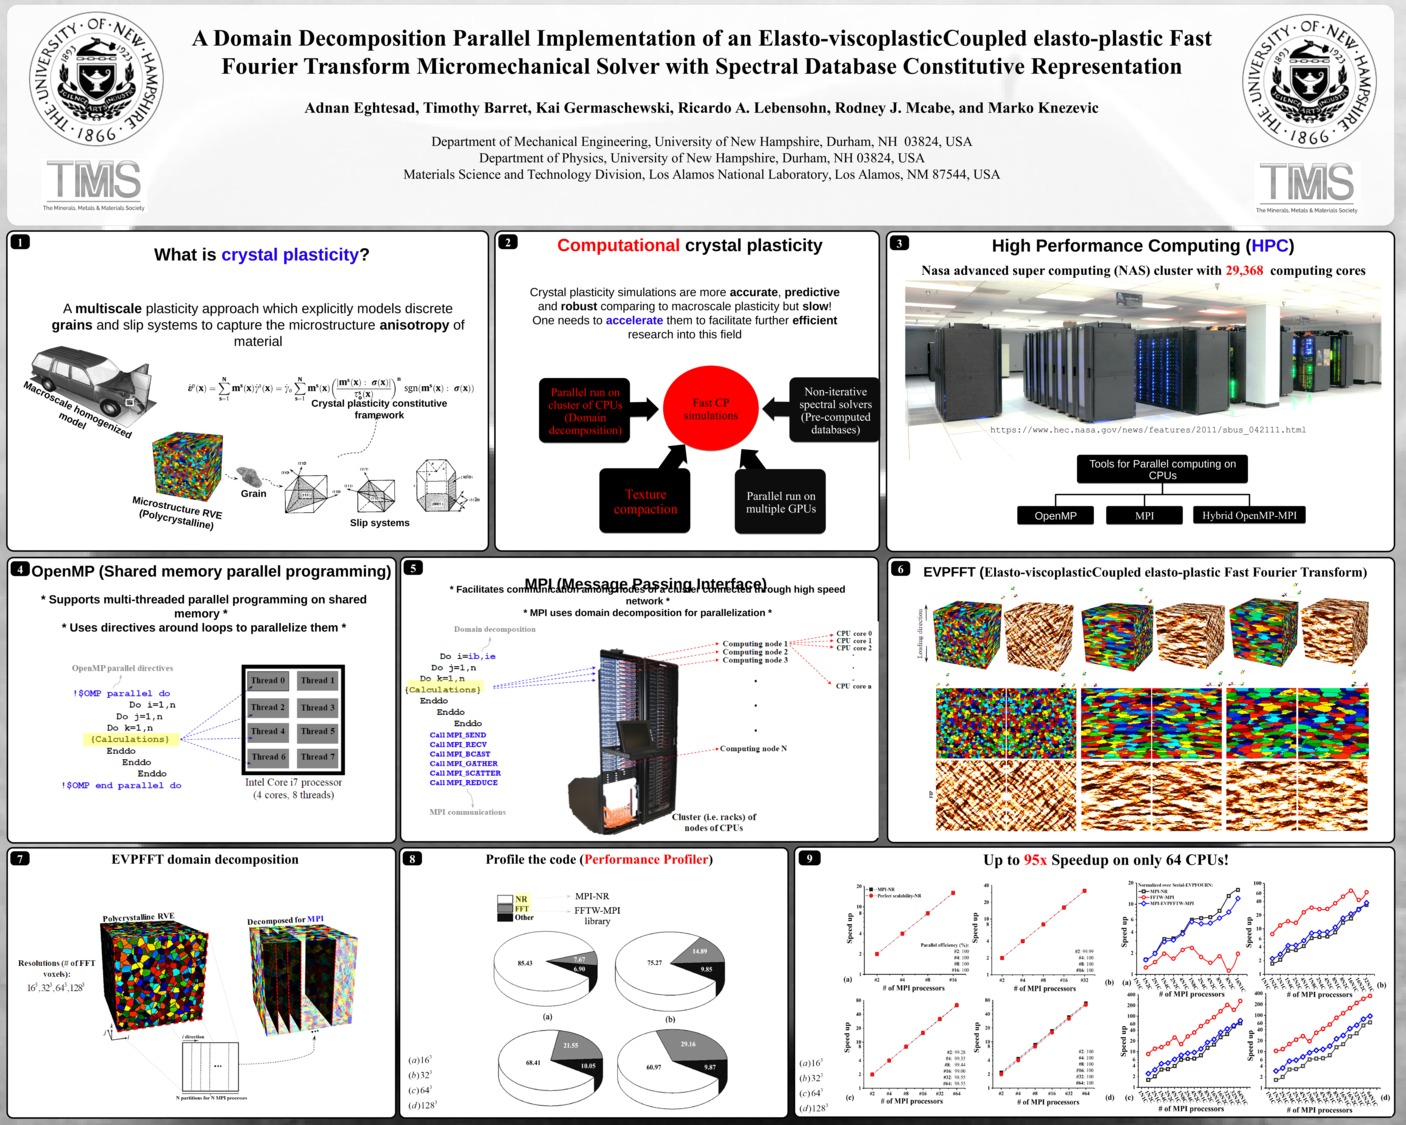 A Domain Decomposition Parallel Implementation Of An Elasto-Viscoplasticcoupled Elasto-Plastic Fast Fourier Transform Micromechanical Solver With Spectral Database Constitutive Representation by ae1007